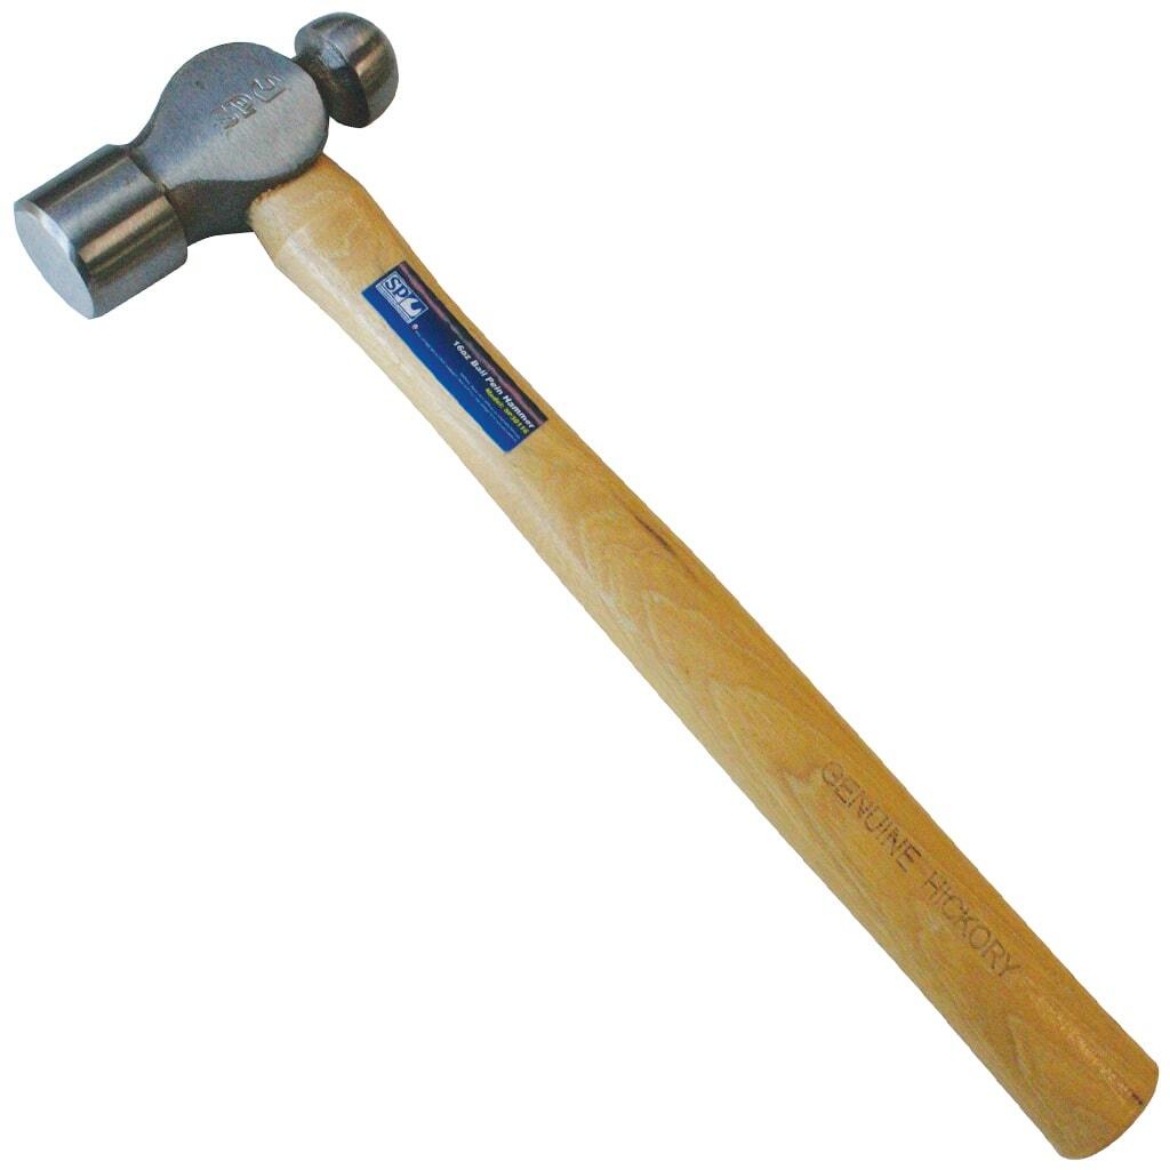 Picture of Ball Pein Hammer 1.5lb(24oz)/680g, Hickory Handle